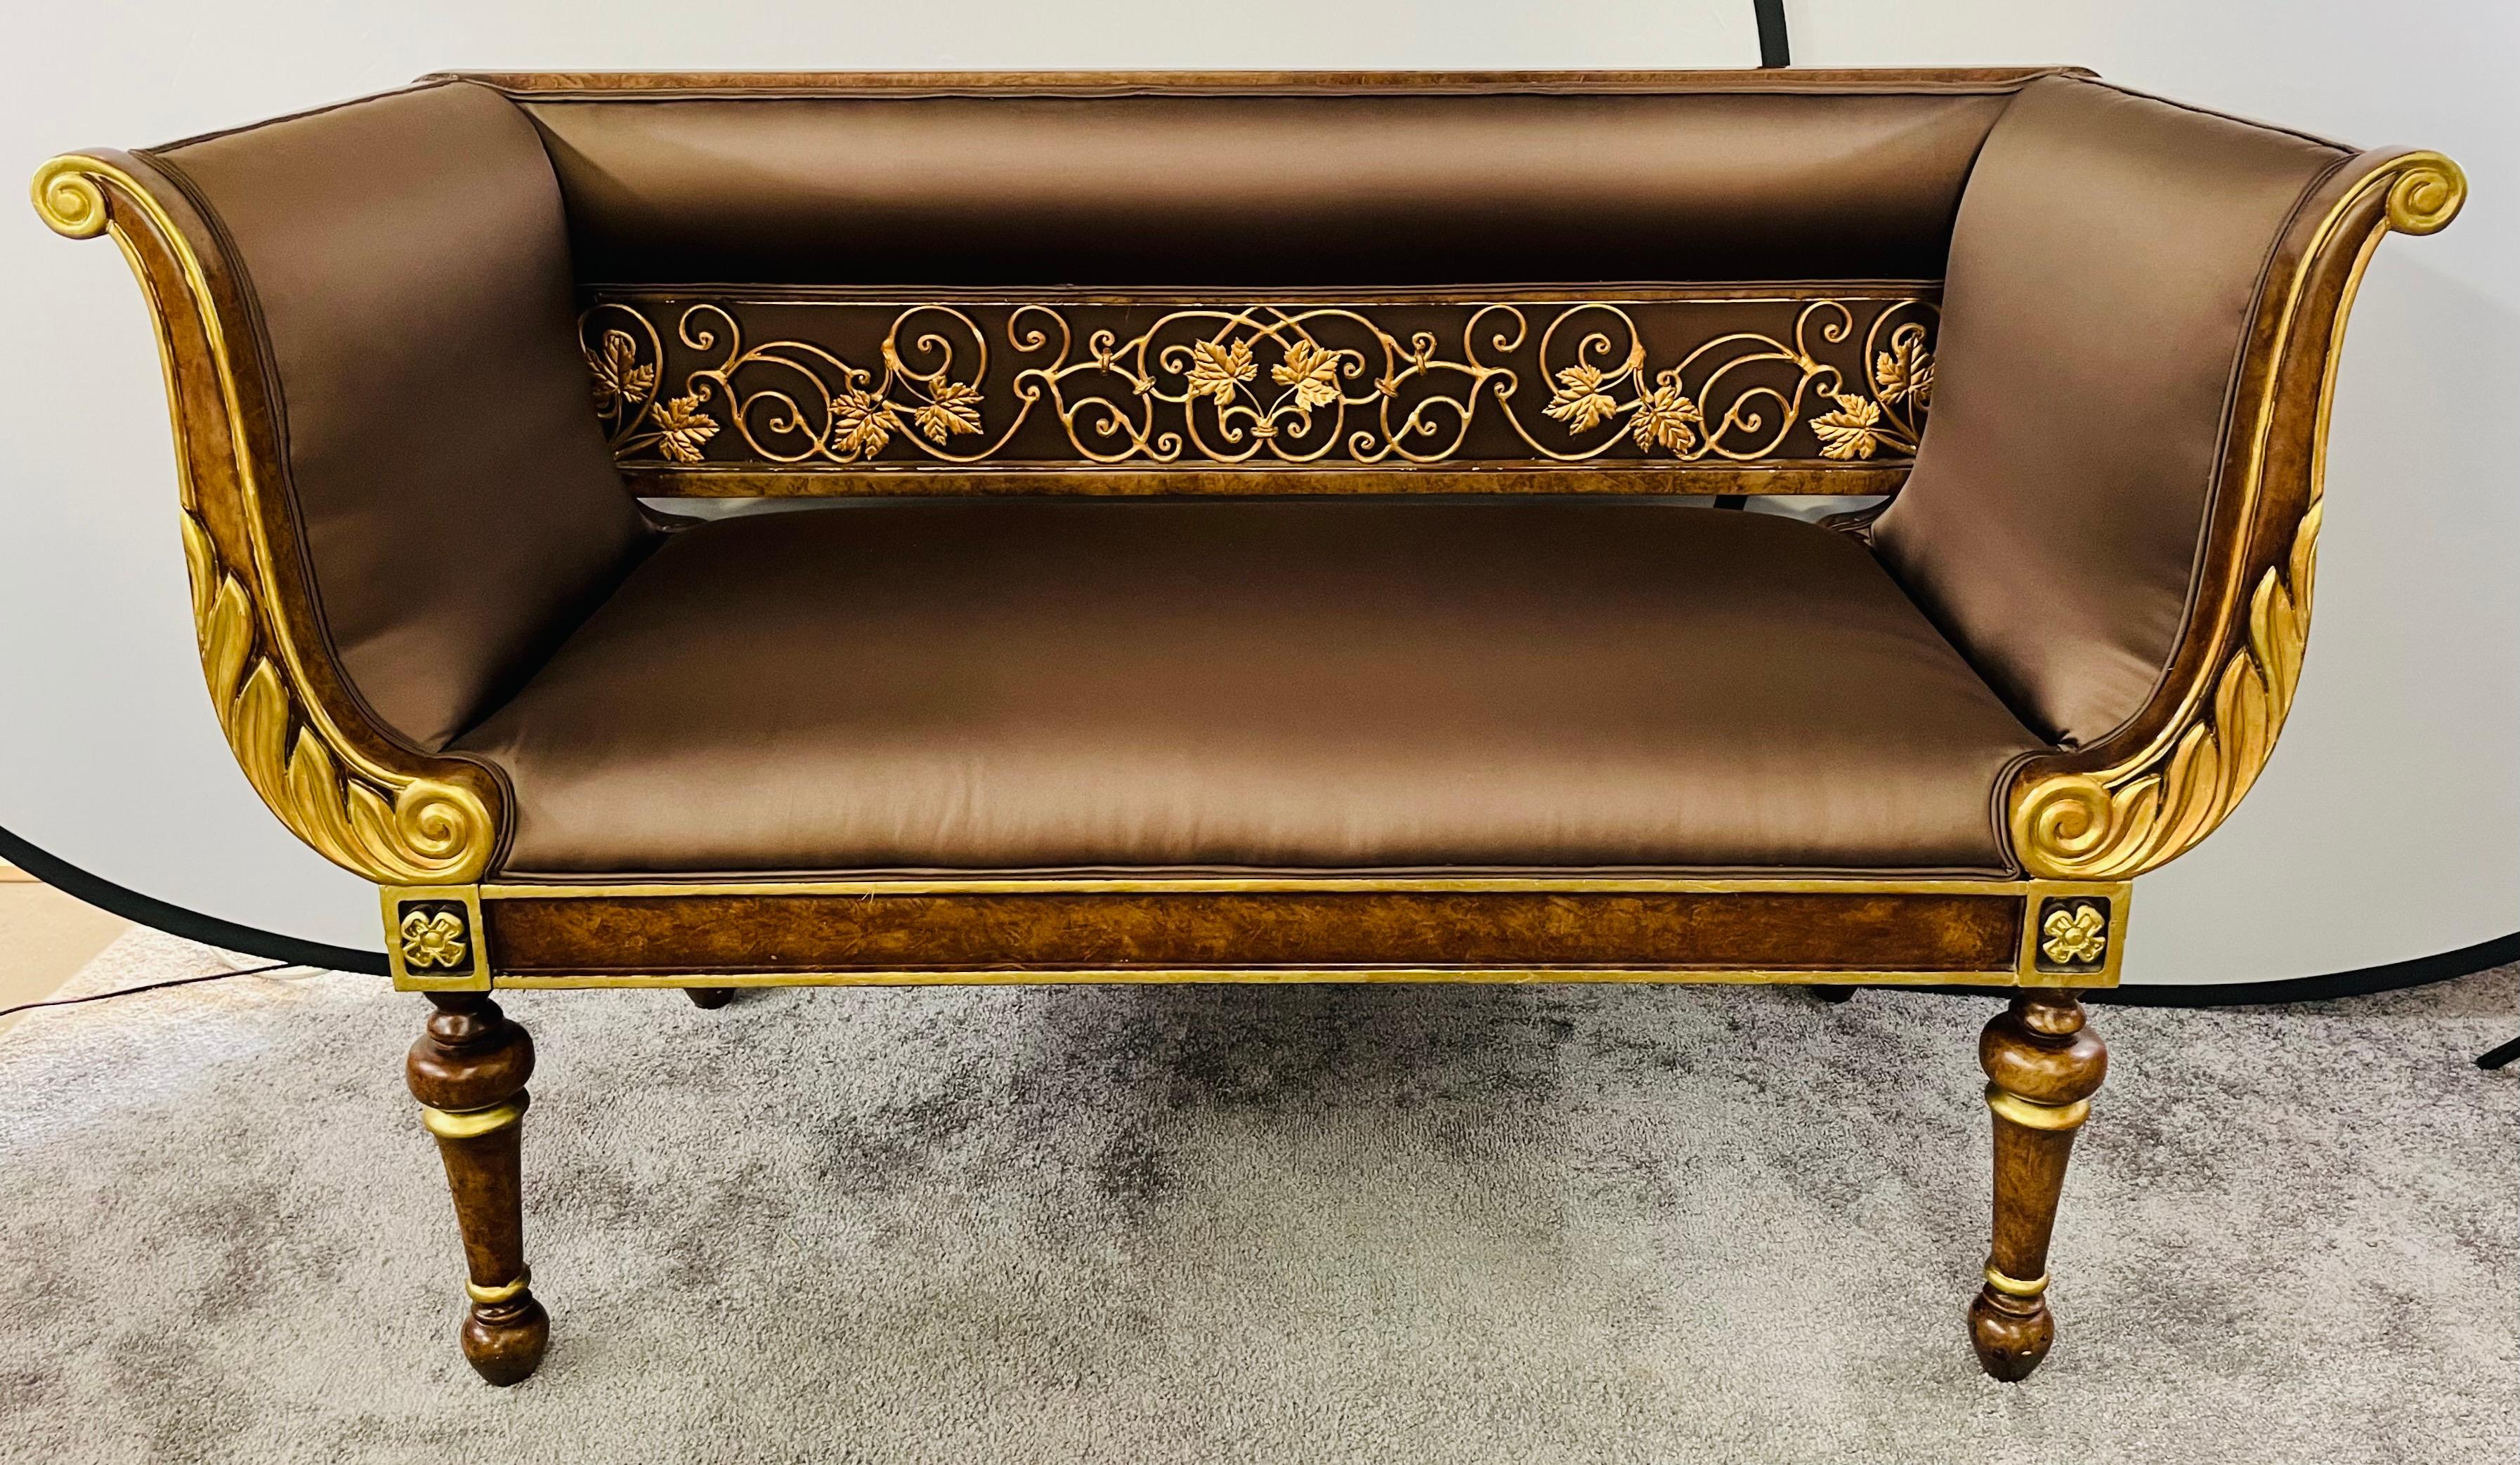 Grace your space with this 19th century Italian Venetian loveseat, settee or canapé. The frame carving is a a work of art featuring a rail of fine wood leaf design across the settee's back and scrolls and wings motifs on both the roll shaped arms